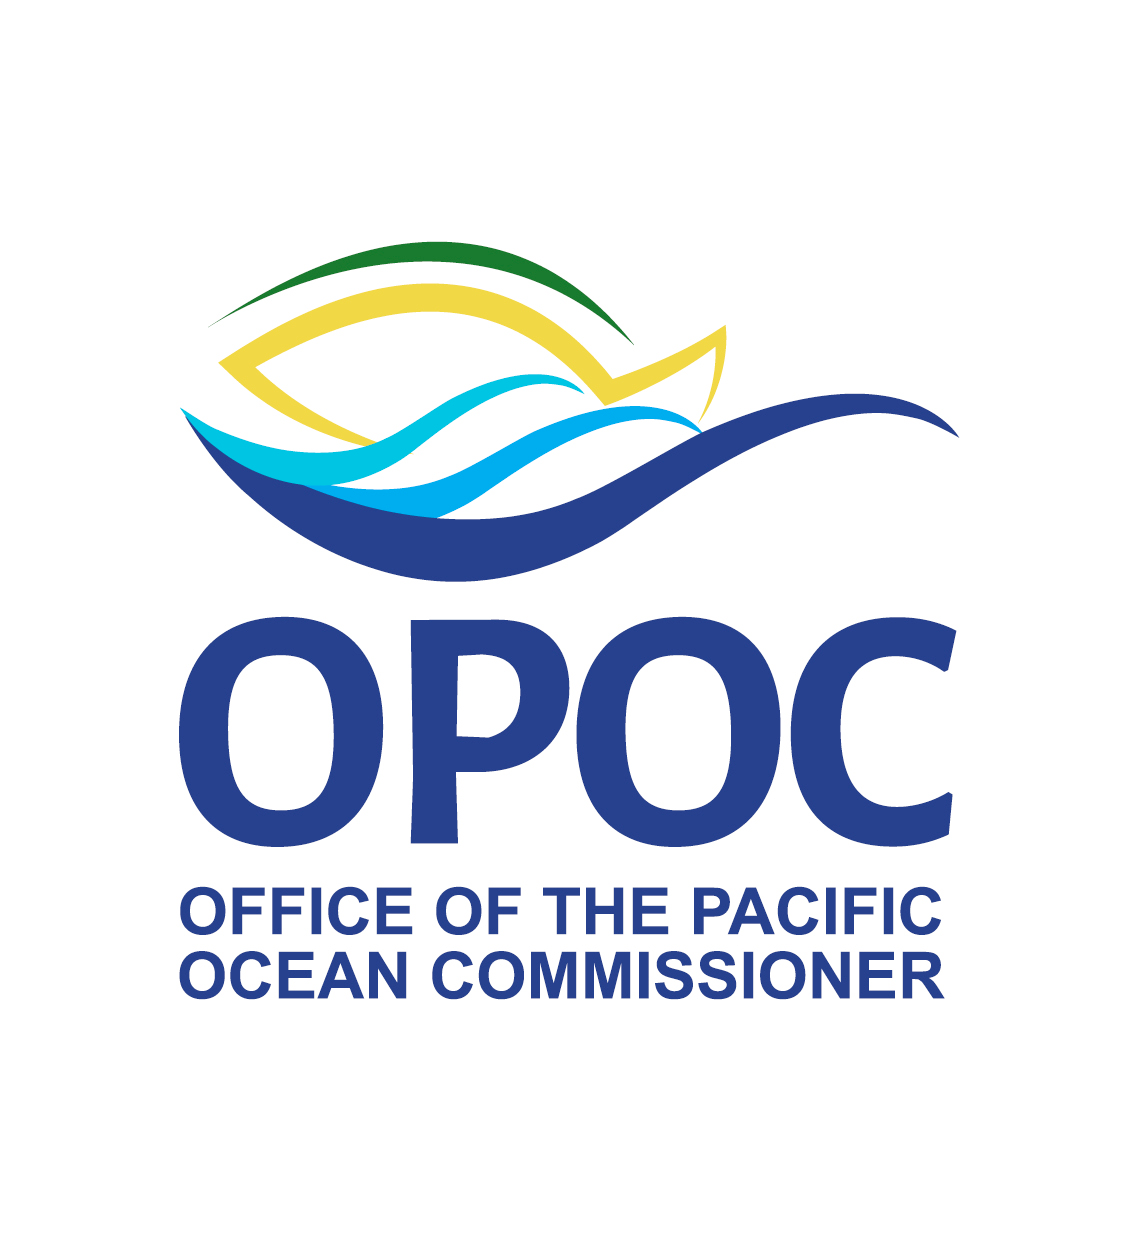 Office of the Pacific Ocean Commissioner